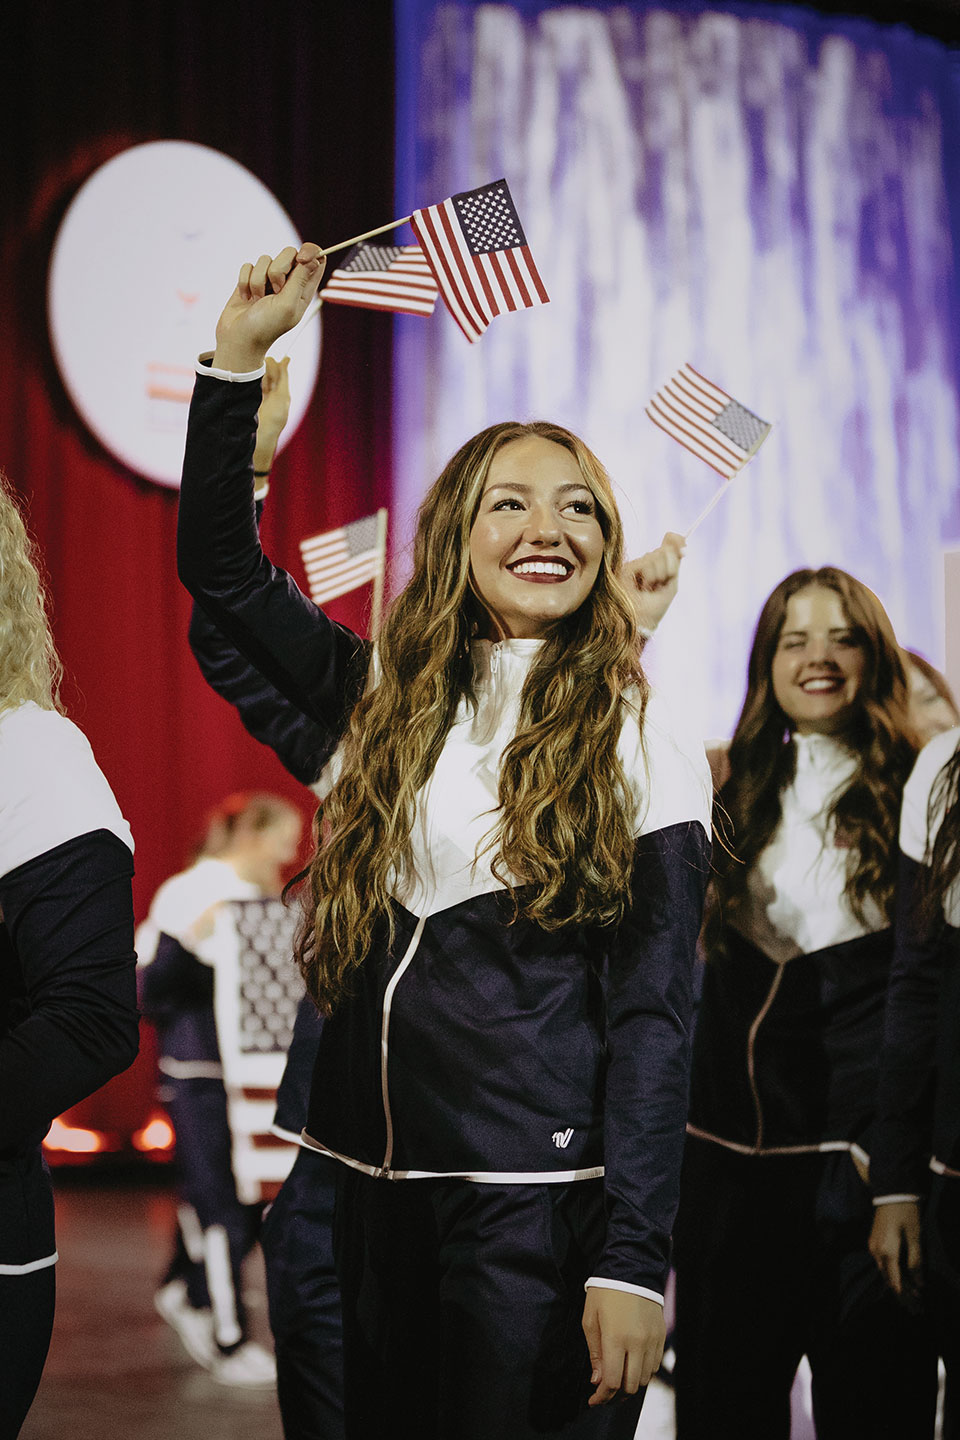 UVU dancer Taylor Williams waves an American flag during the ICU opening ceremonies